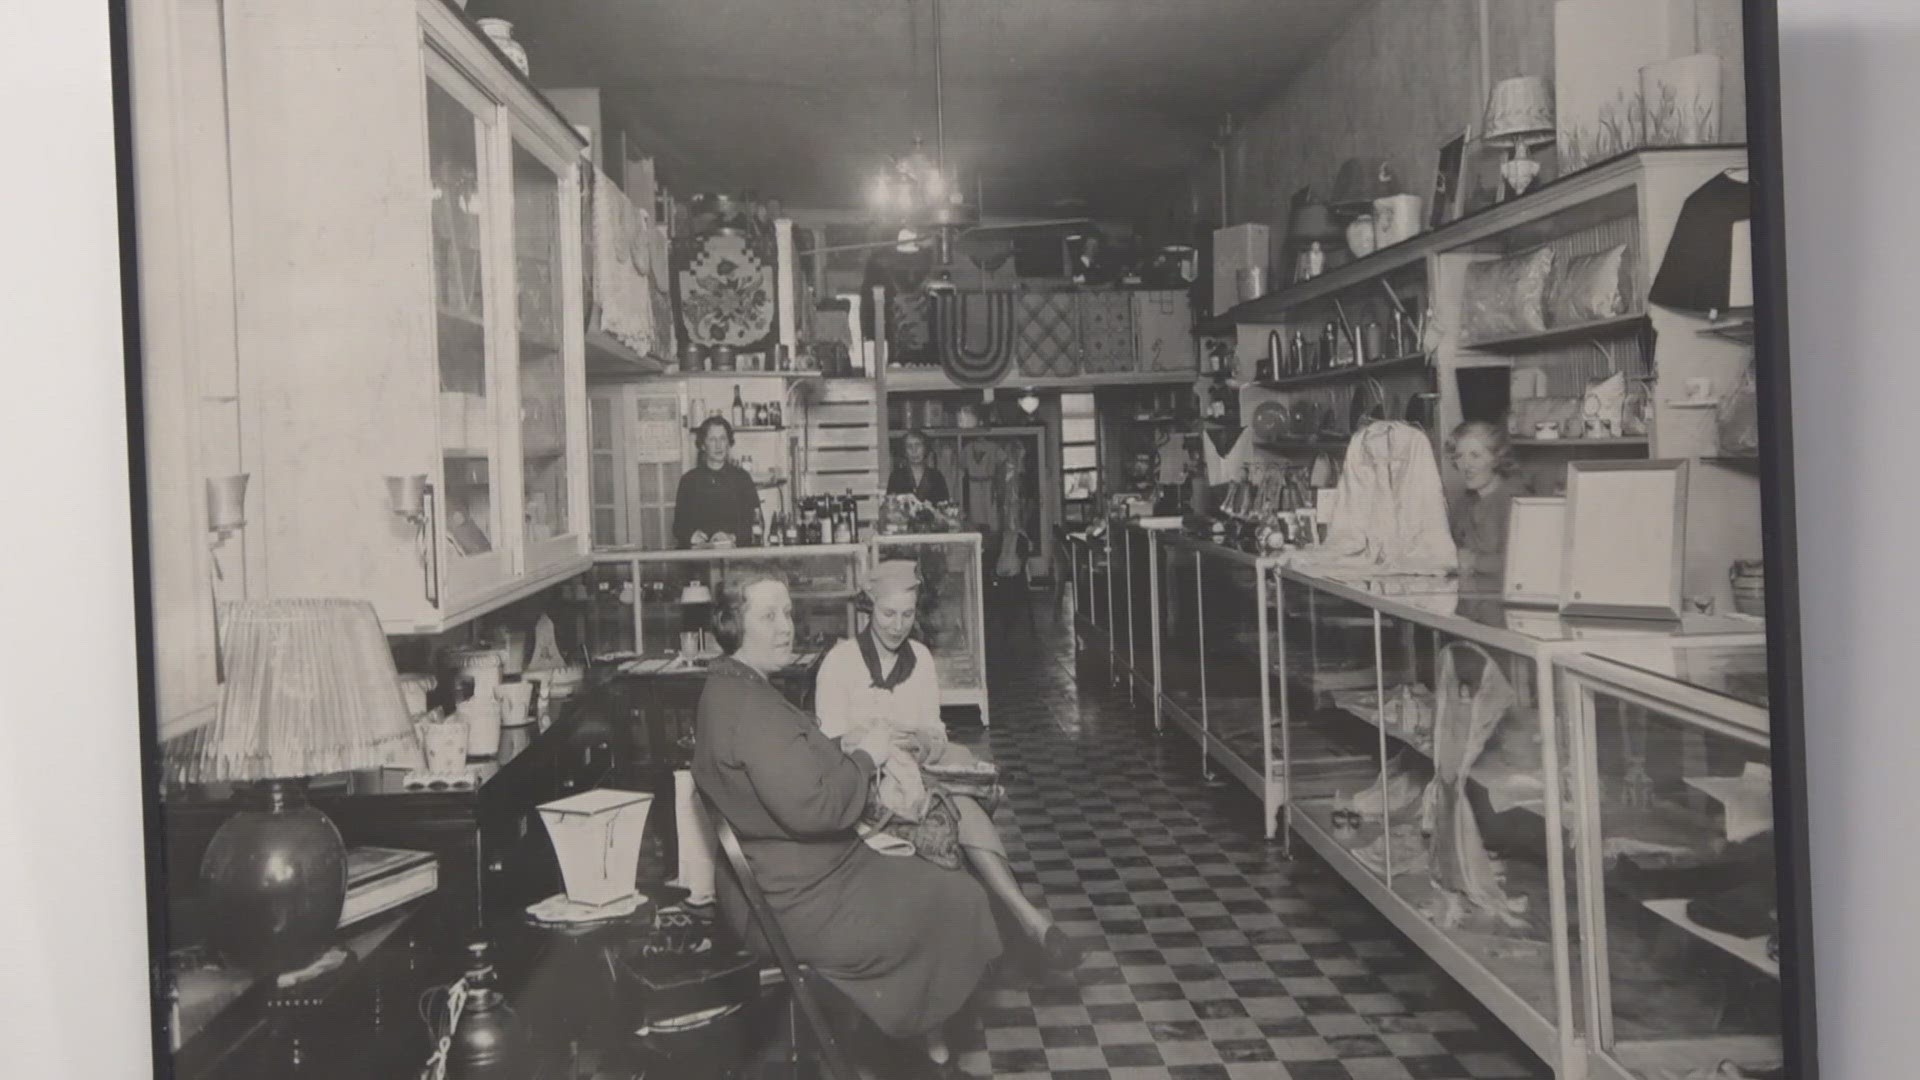 The nonprofit started back in 1883, during a time where there were few ways women could work.